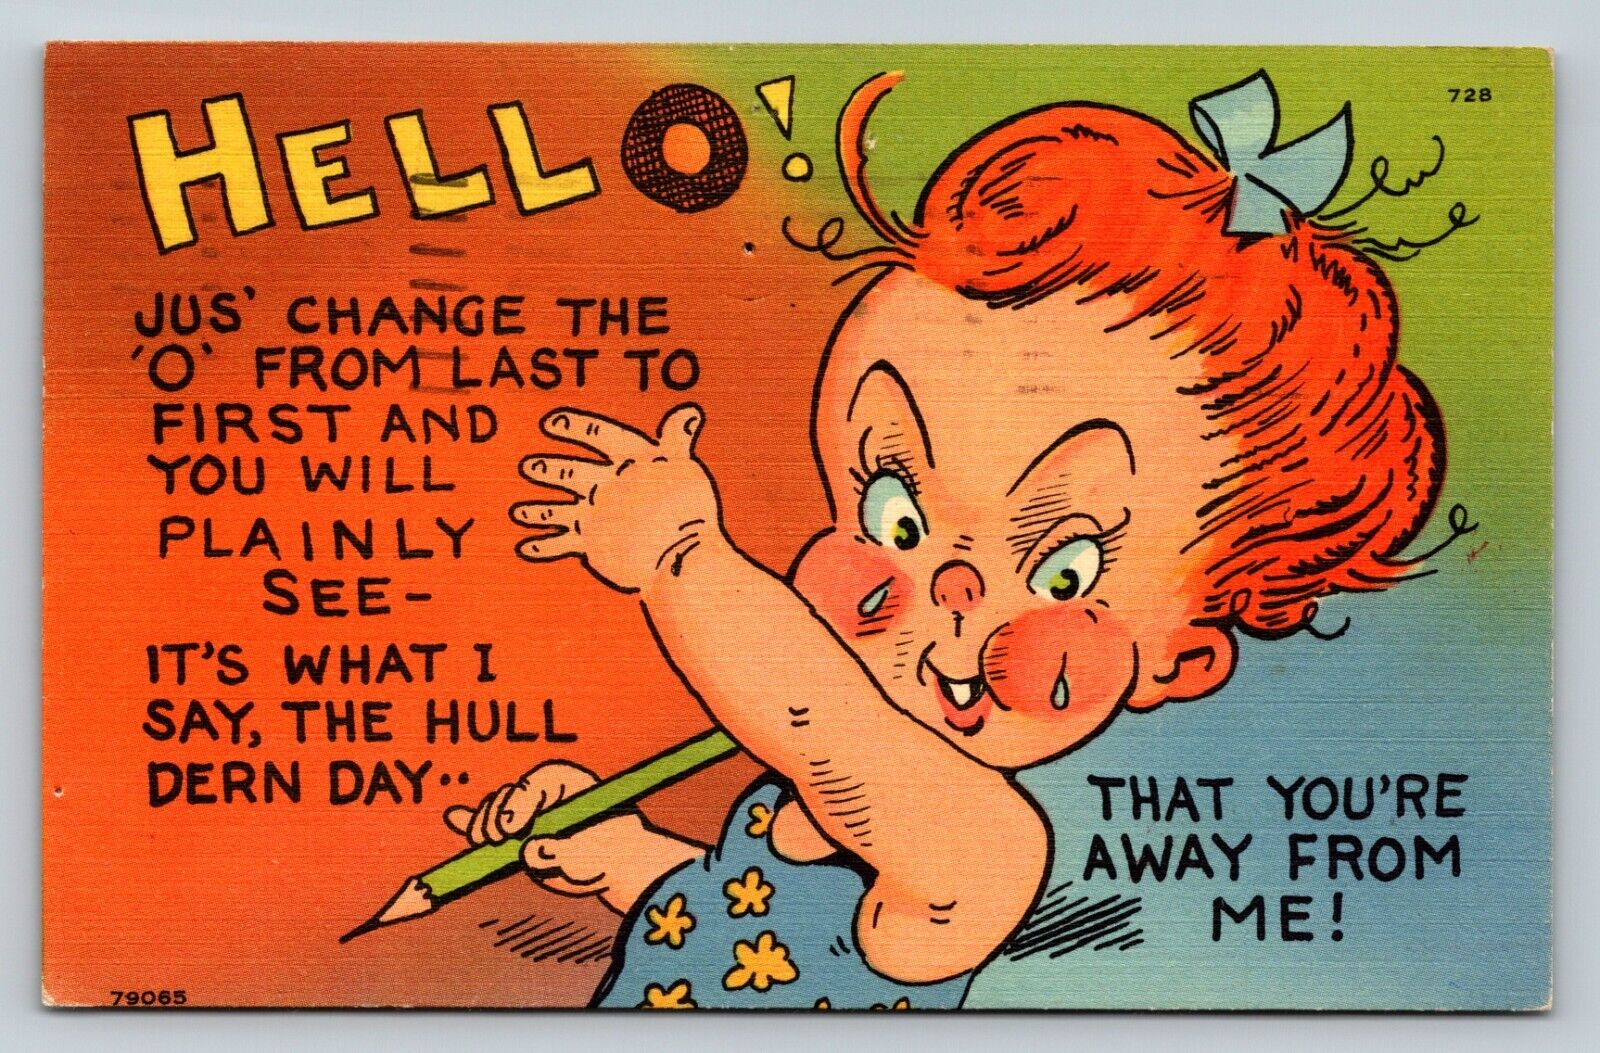 c1951 Hello jus change the O from First to Last Humor Vintage Postcard 1129